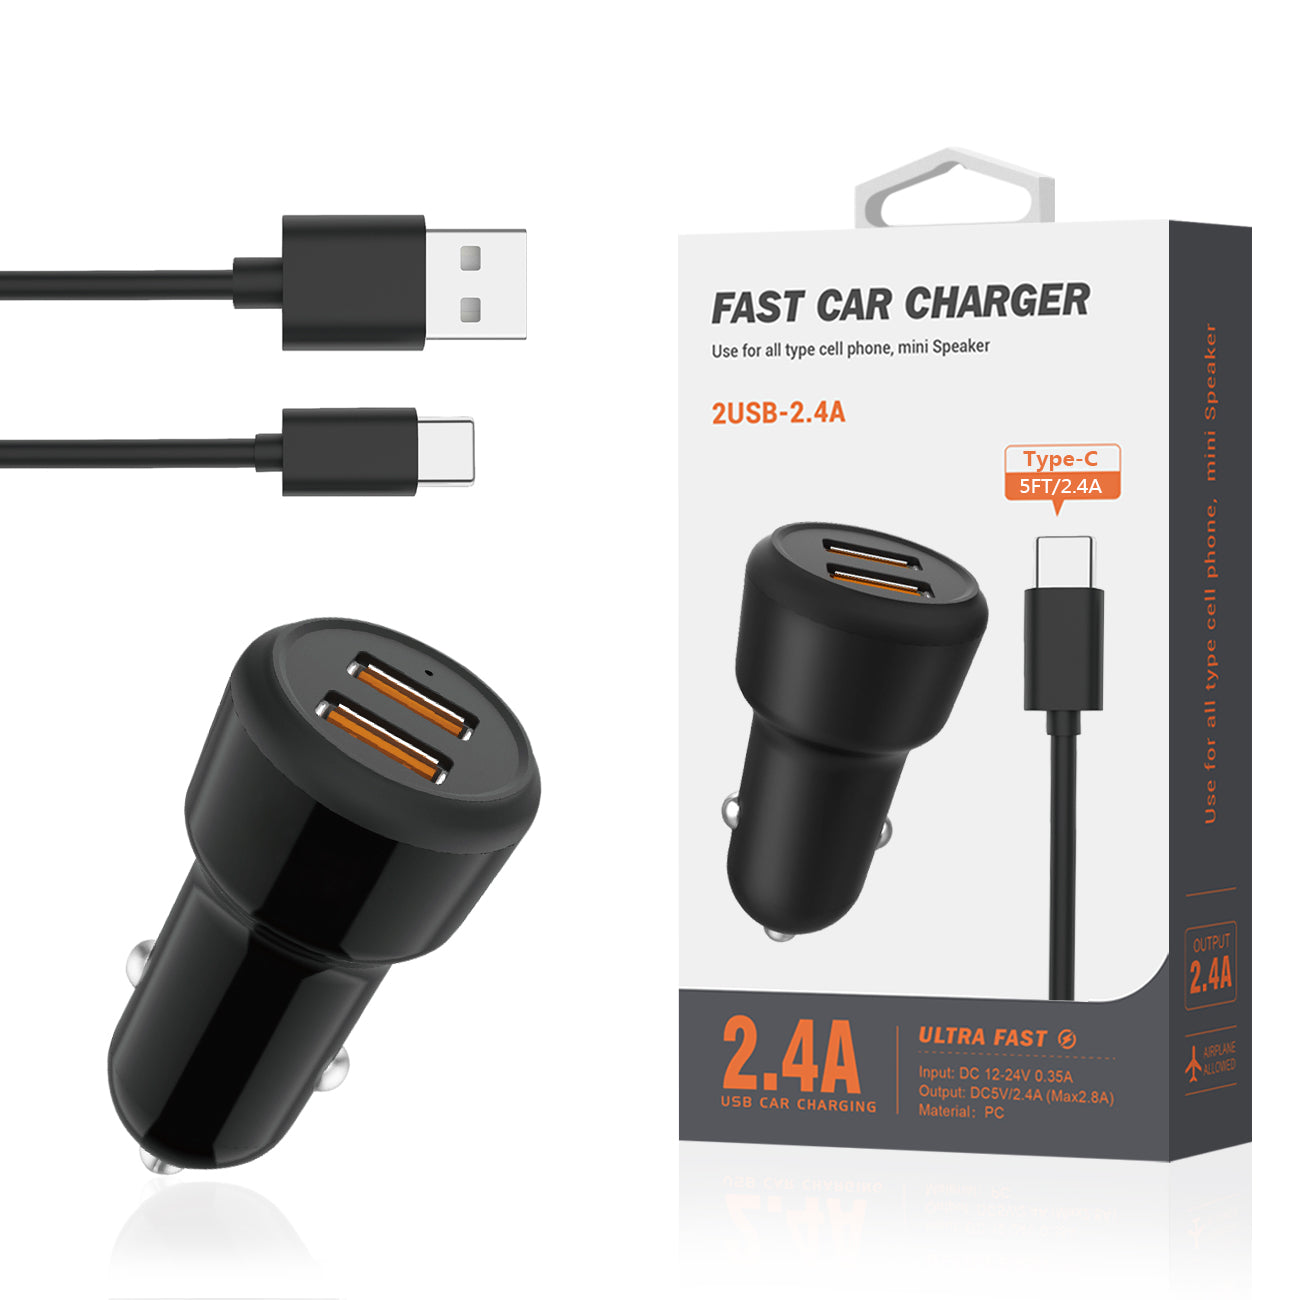 Reiko Typec Portable Car Charger With Built In 3 Ft Cable In Black